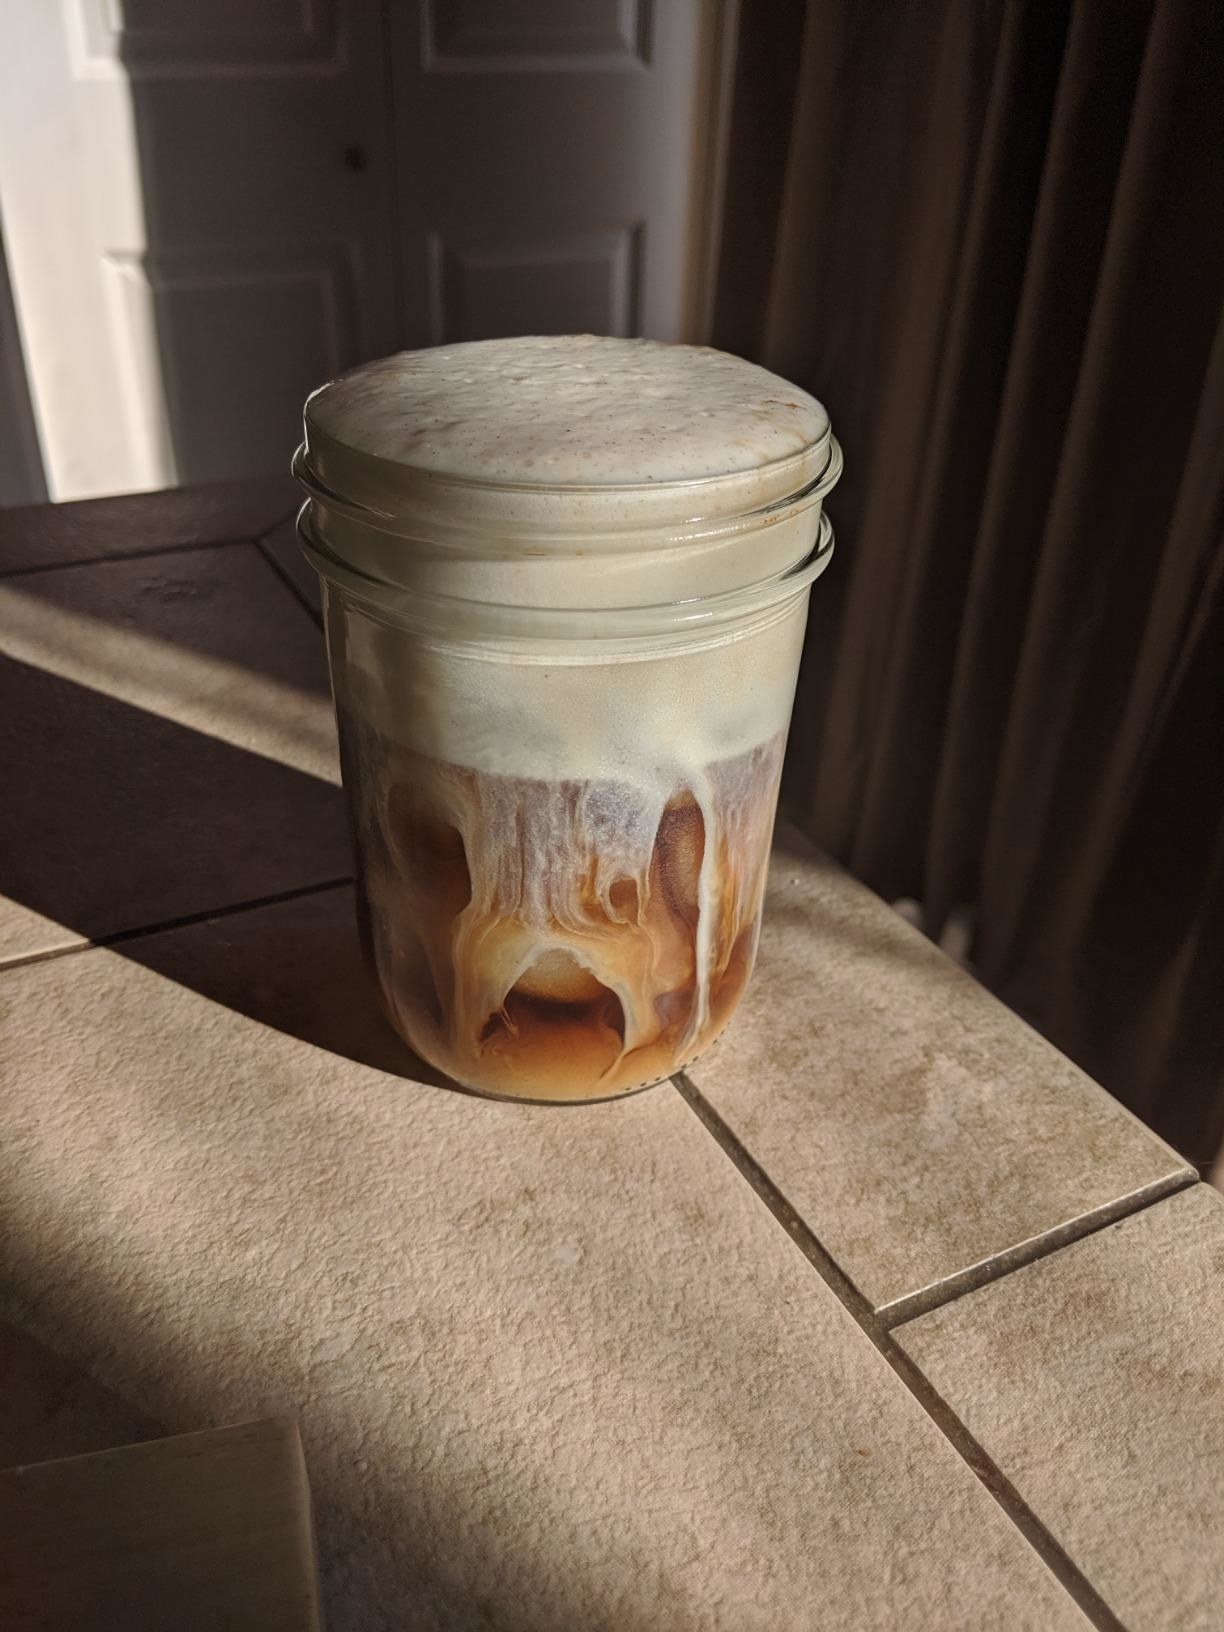 A mason jar filled with iced coffee and foamed milk